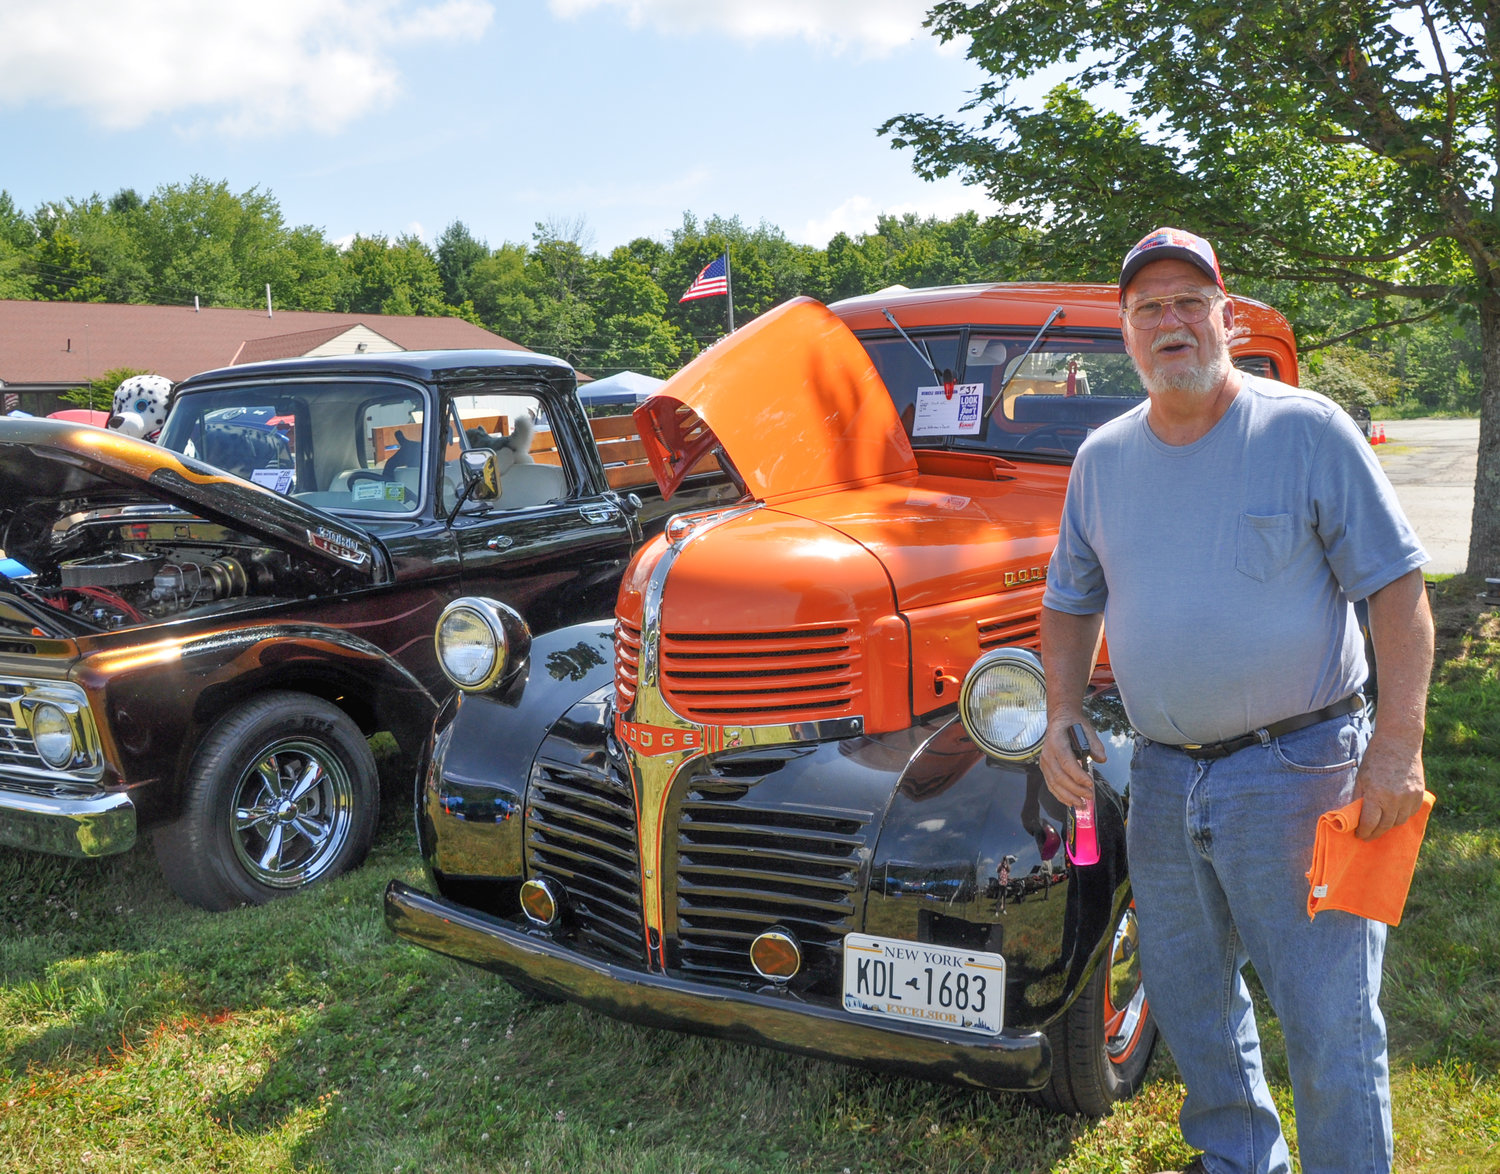 “This one belongs to my wife, Joanne,” Dave Kellermeyer told me as I snapped pics of their gorgeous 1947 Dodge WC.